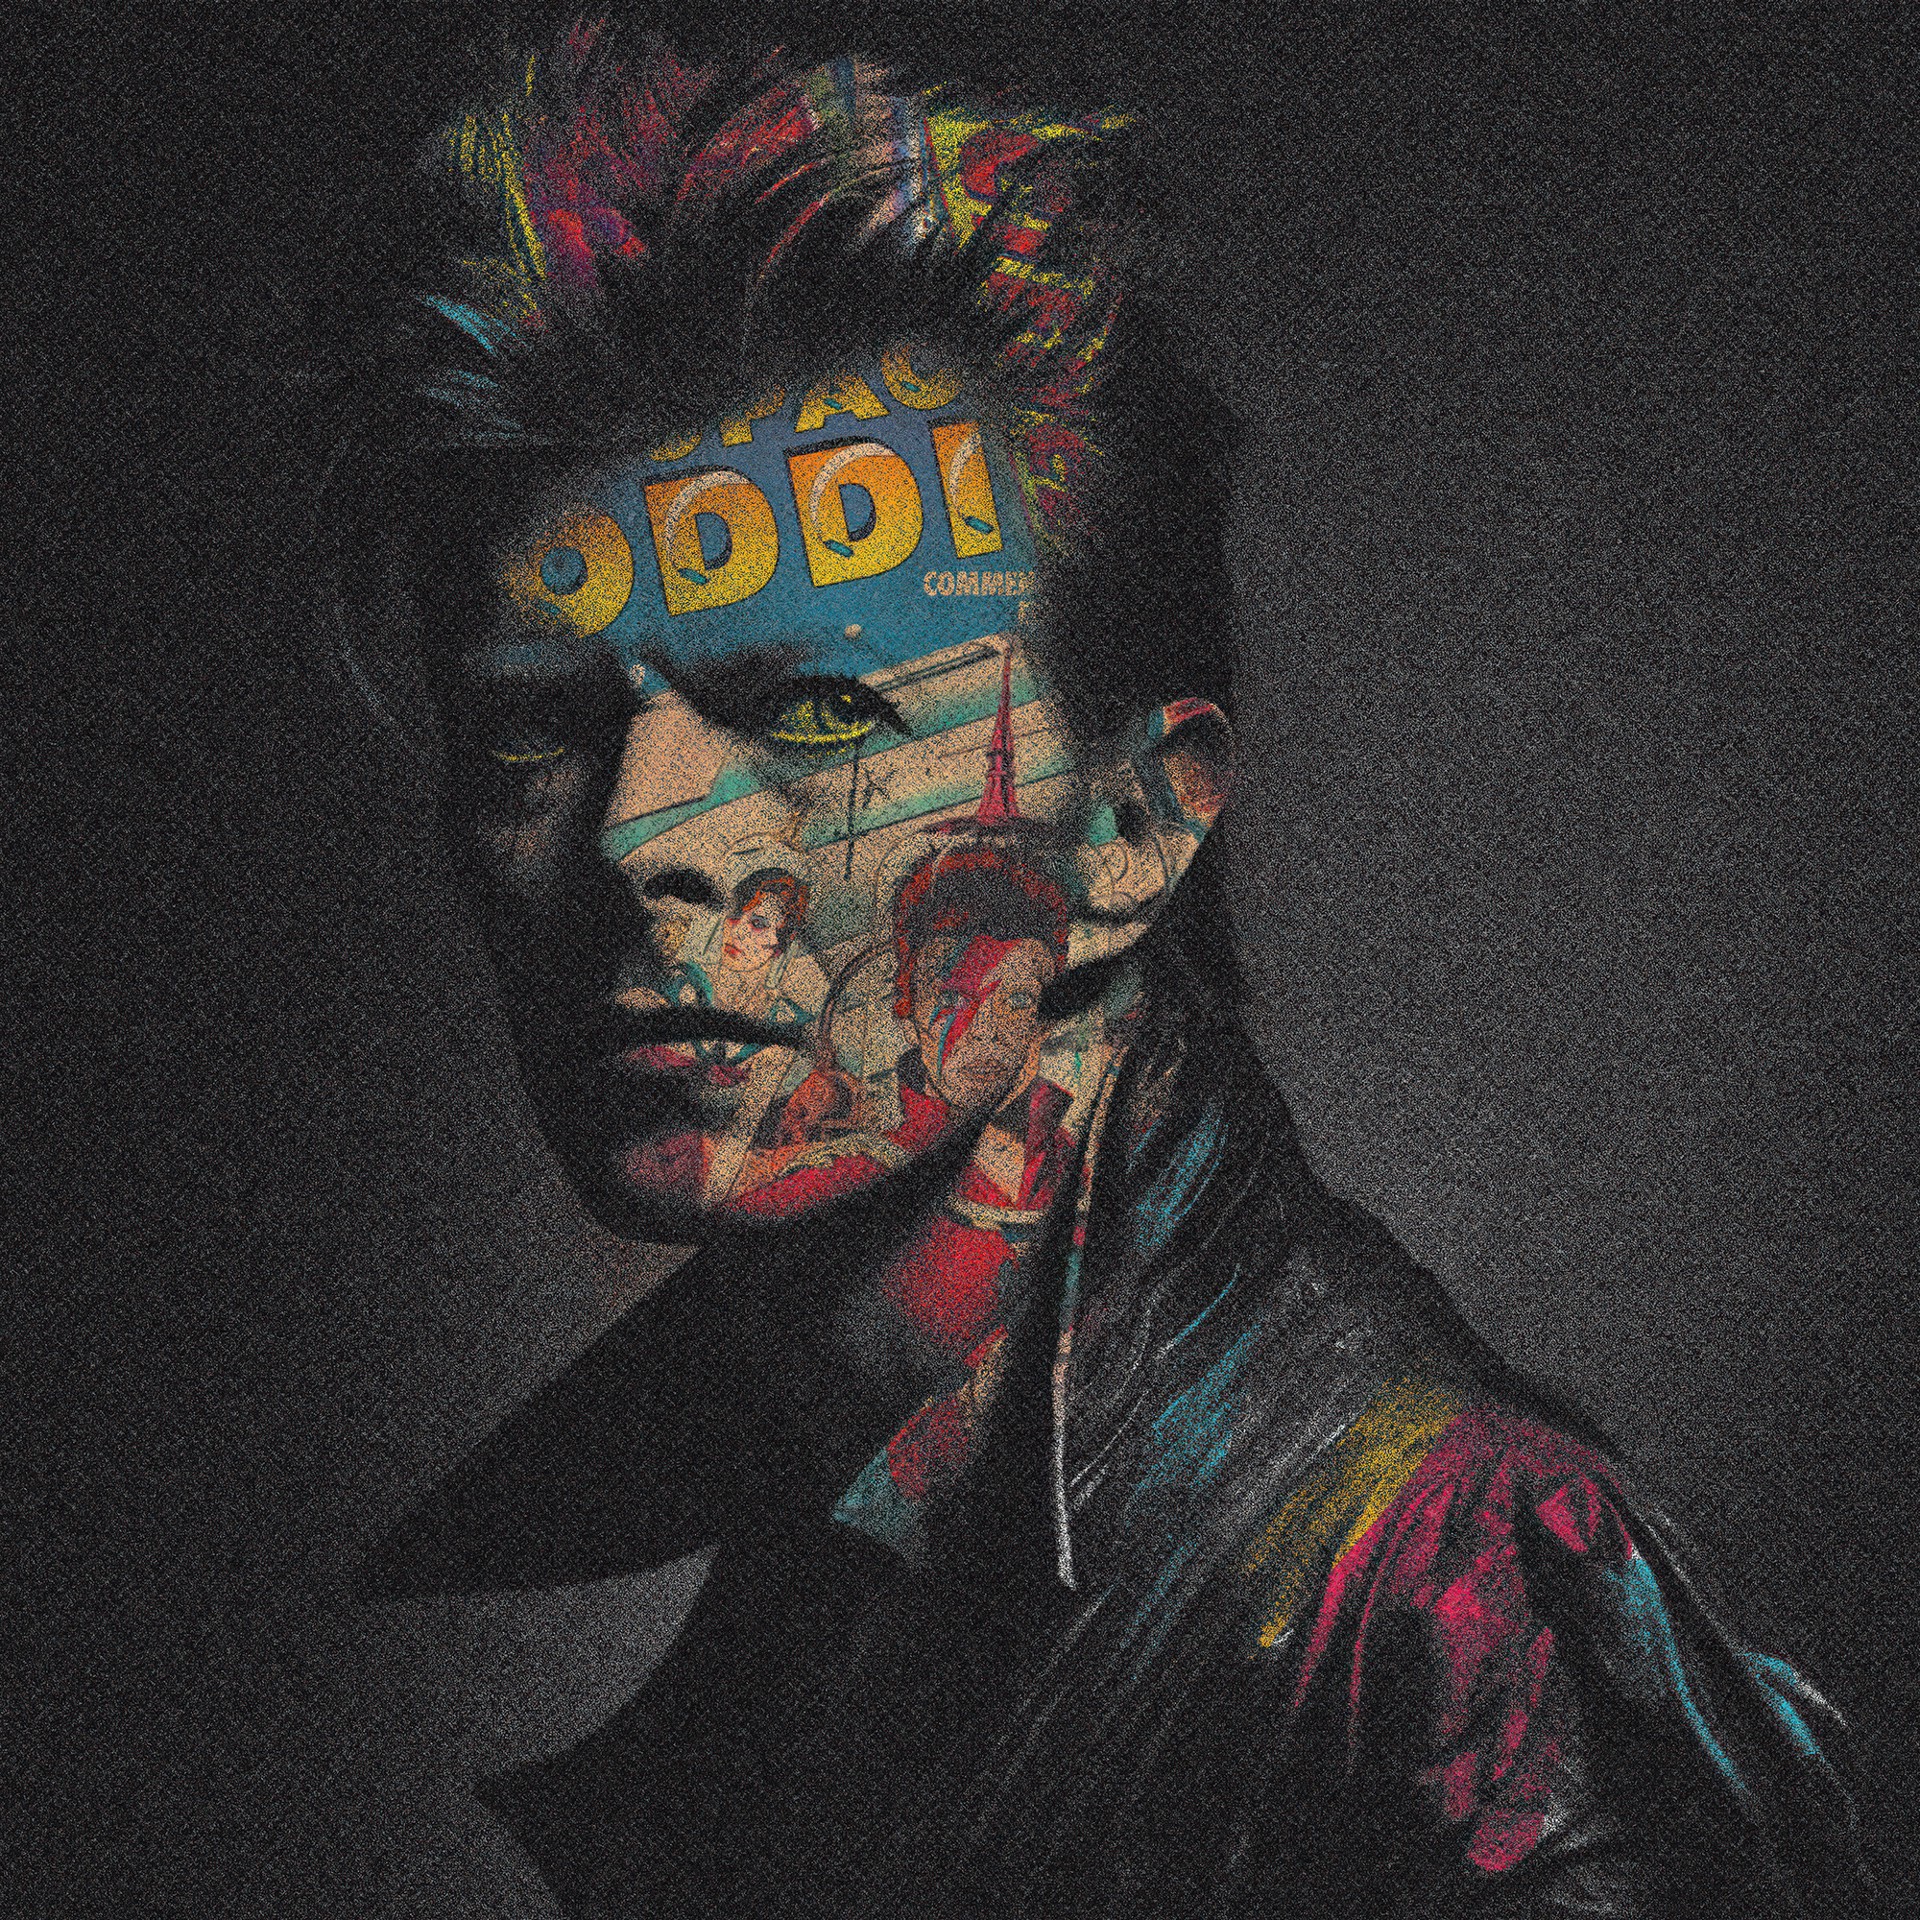 Bowie by Gary Dorsey